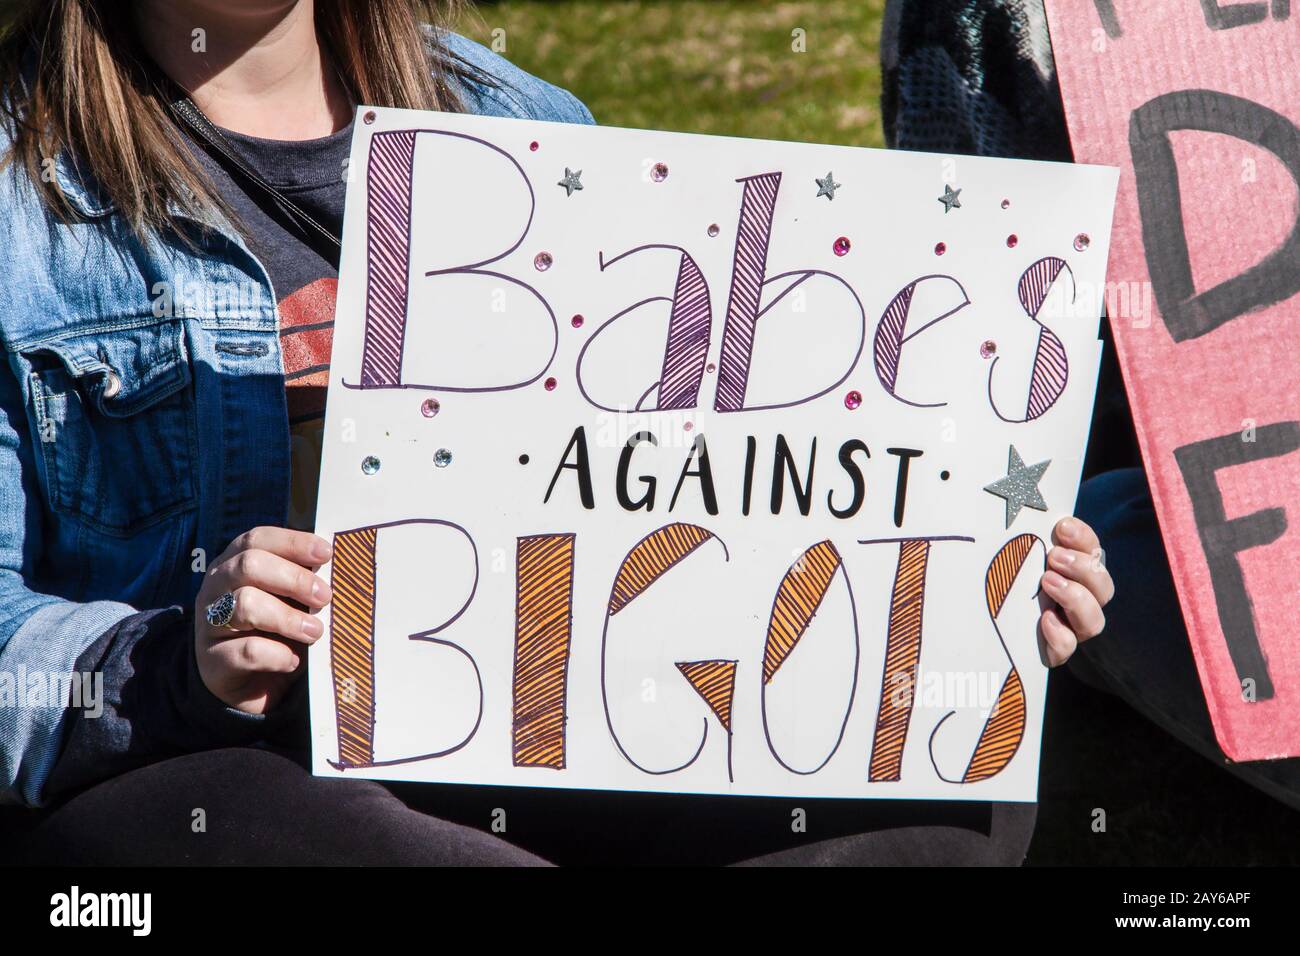 Girl in jeans jacket holding homemade sign - Babes against Bigots - with stars and jewels on it Stock Photo